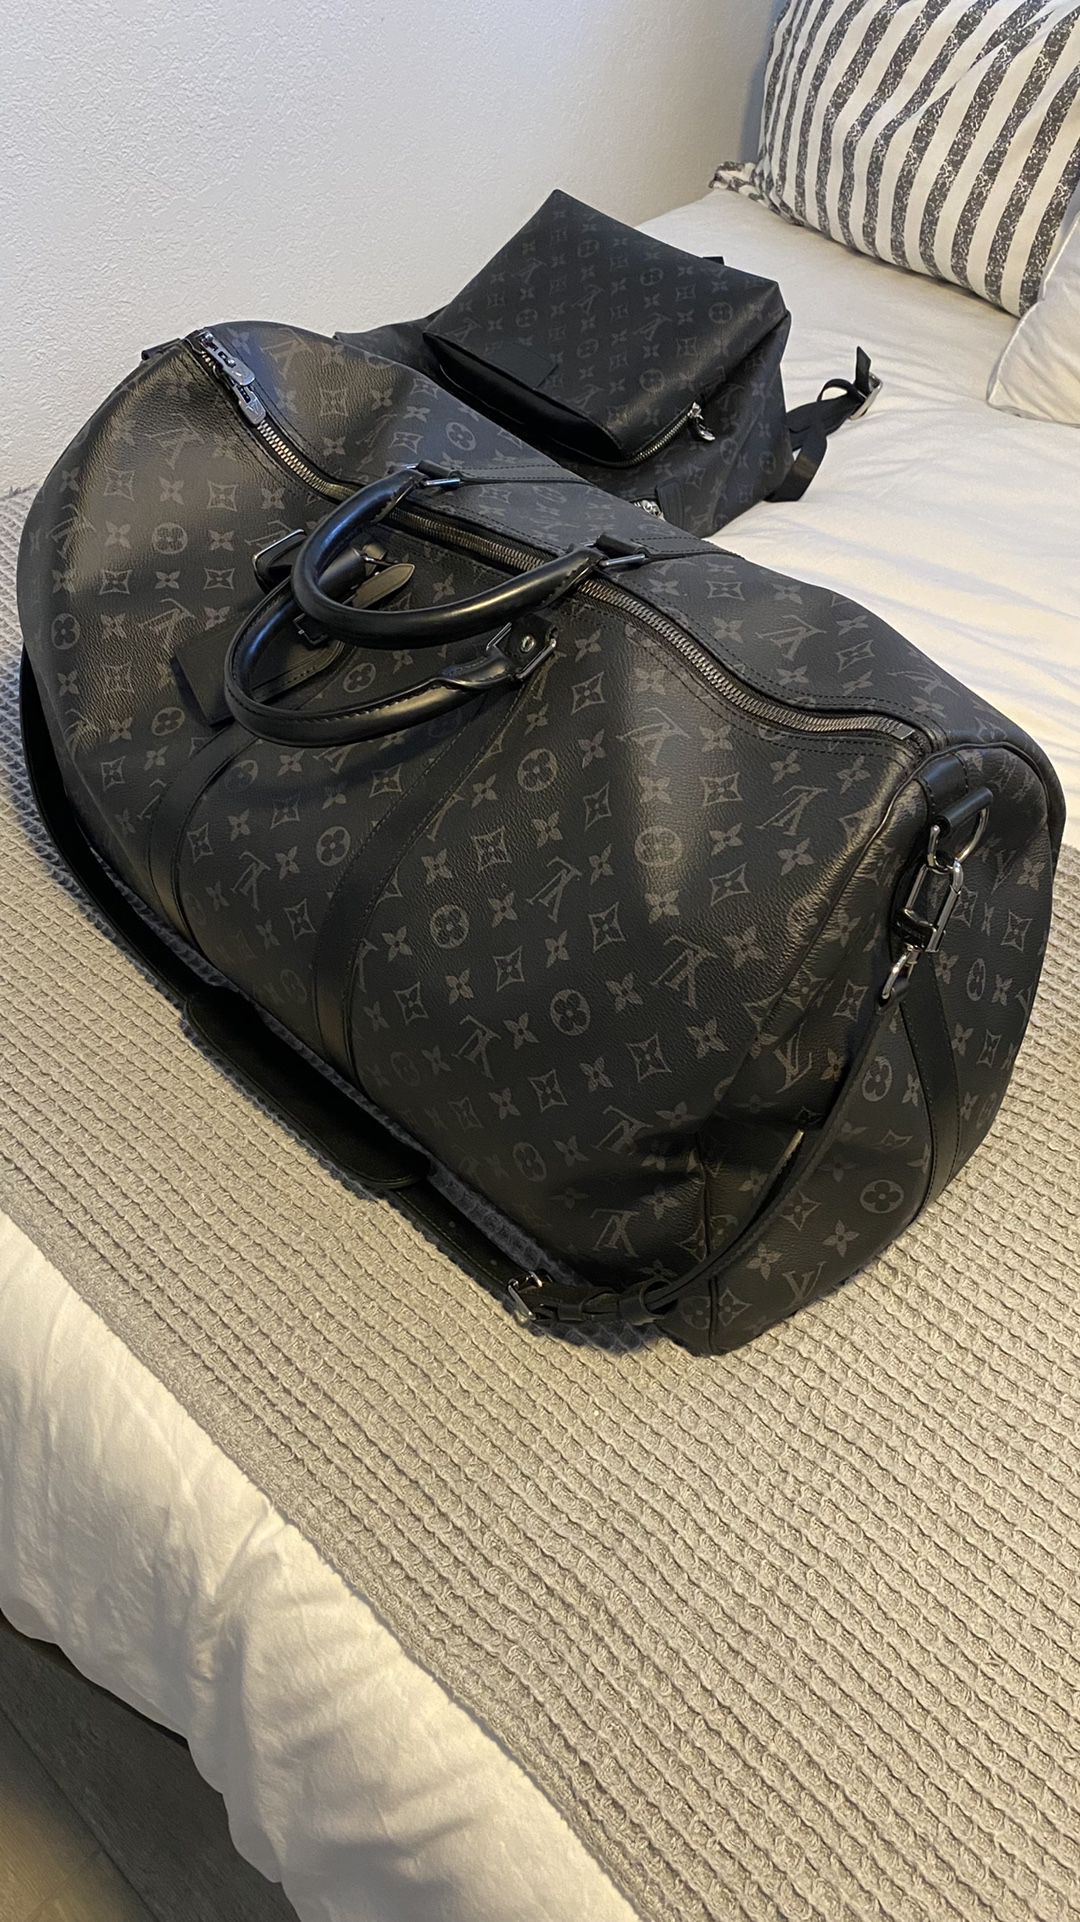 Authentic Vintage Louis Vuitton Keepall 60 Duffle Bag for Sale in Stone  Mountain, GA - OfferUp